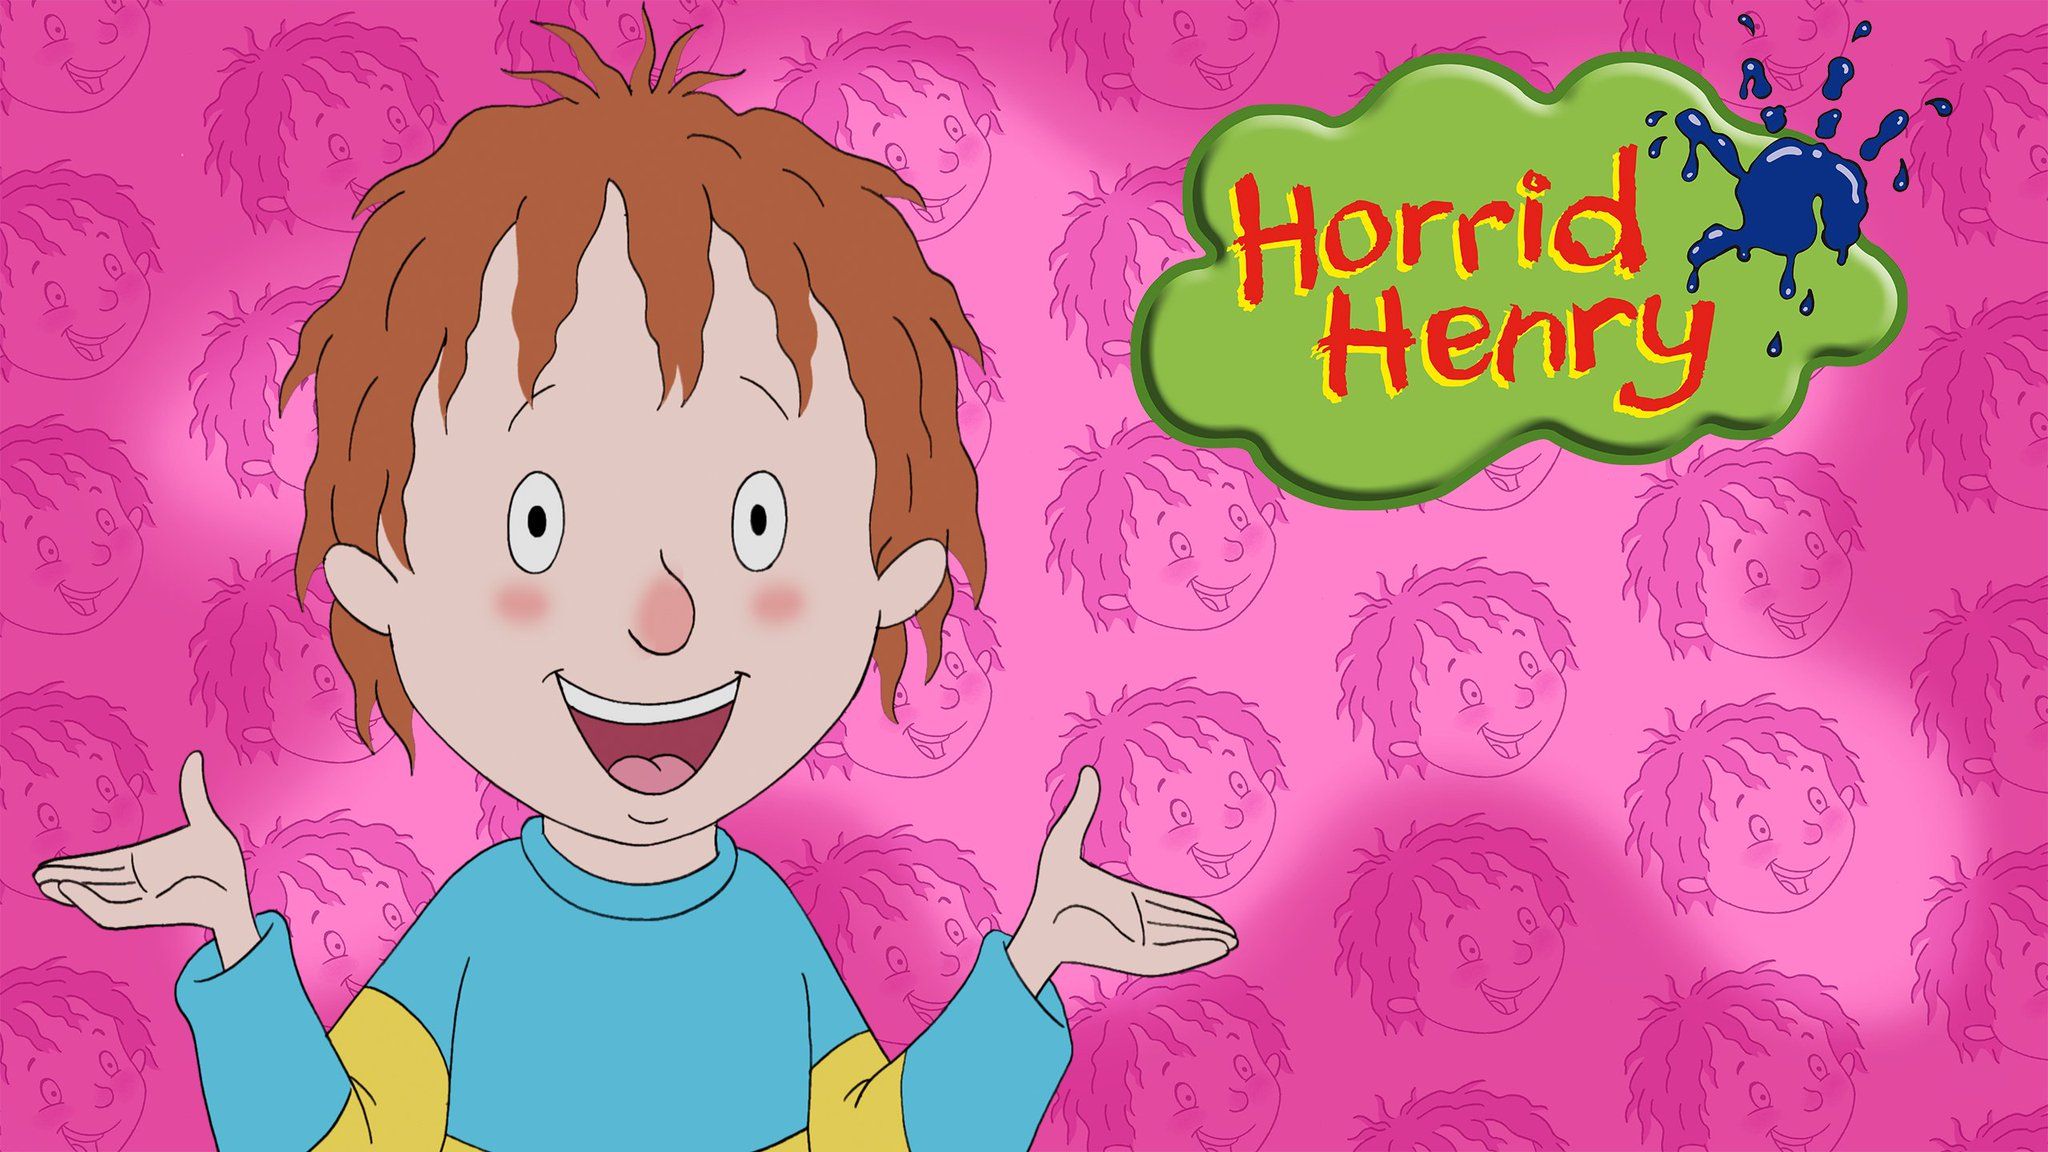 Horrid Henry wants to learn without having to go